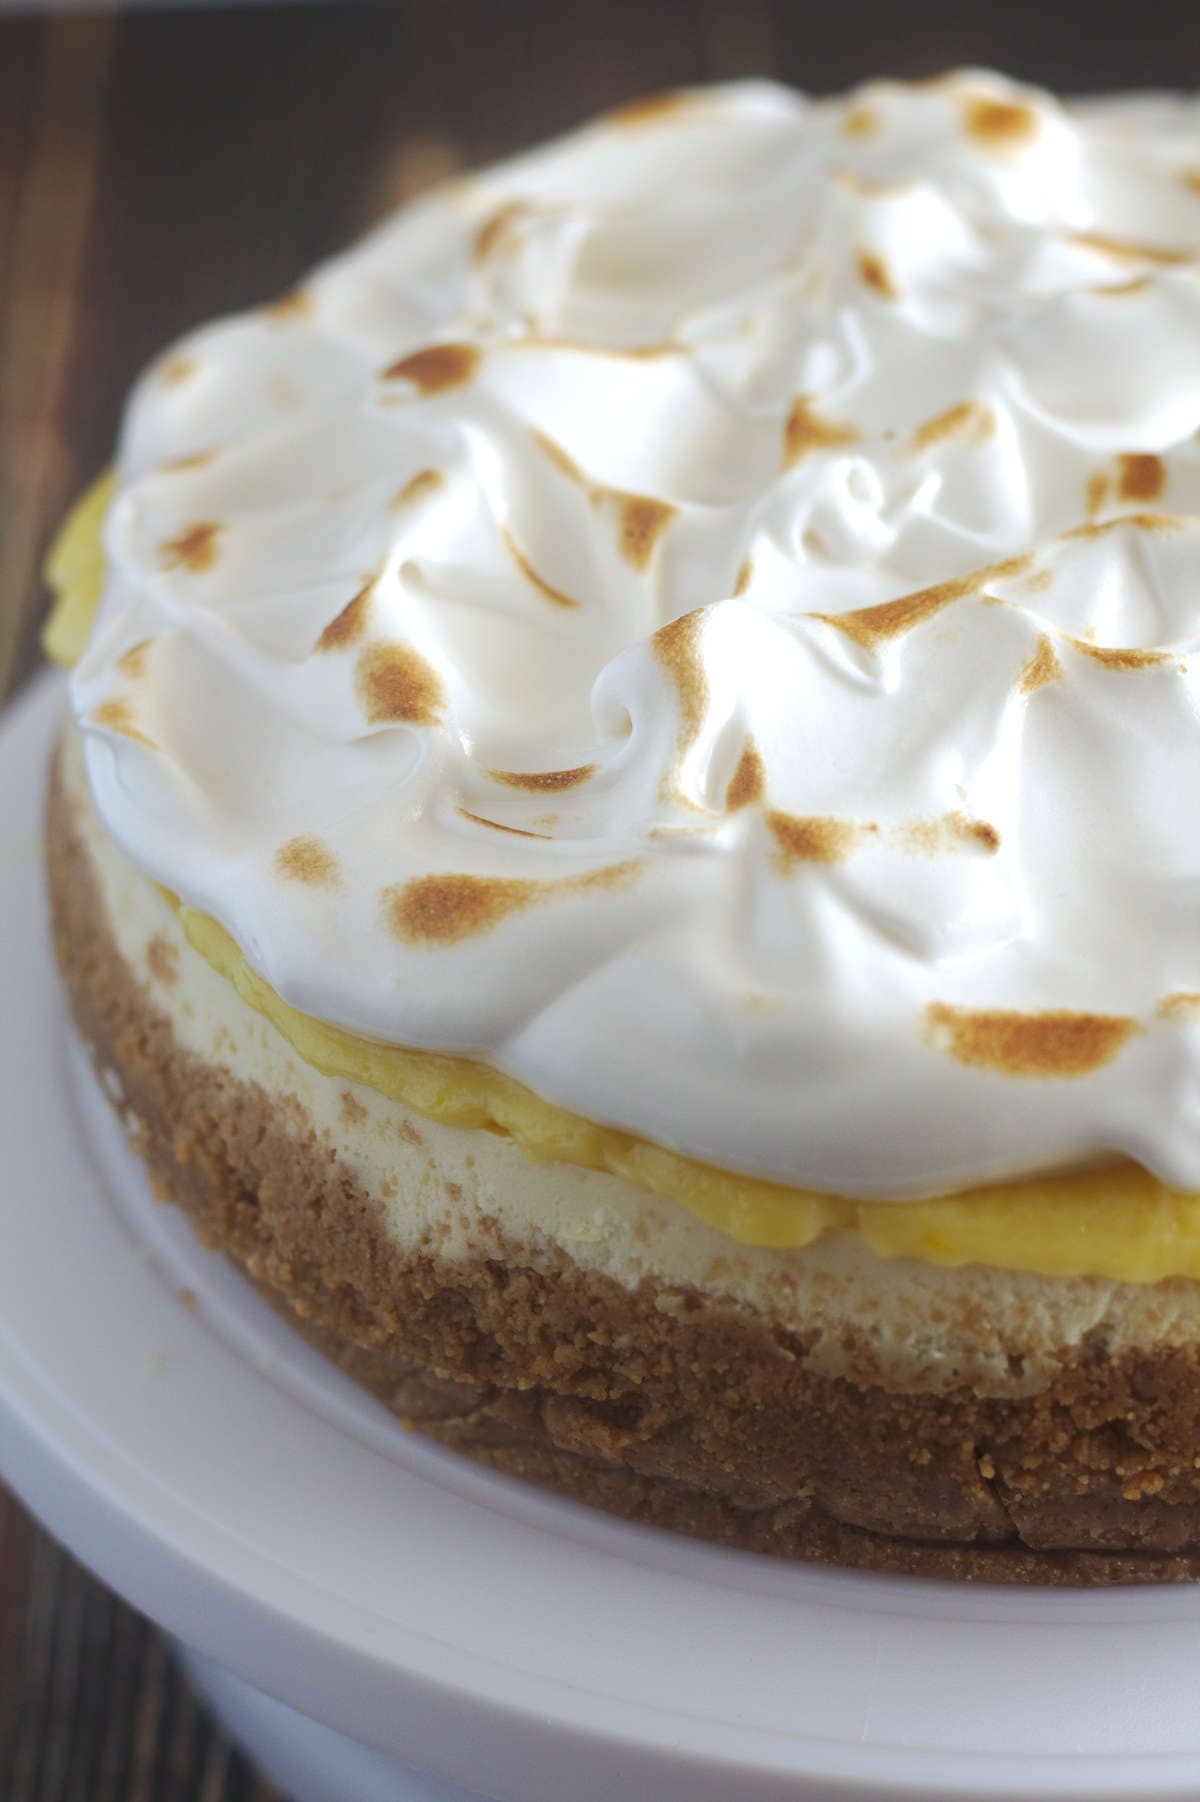 A partial view of a lemon meringue cheesecake on a white cake stand.